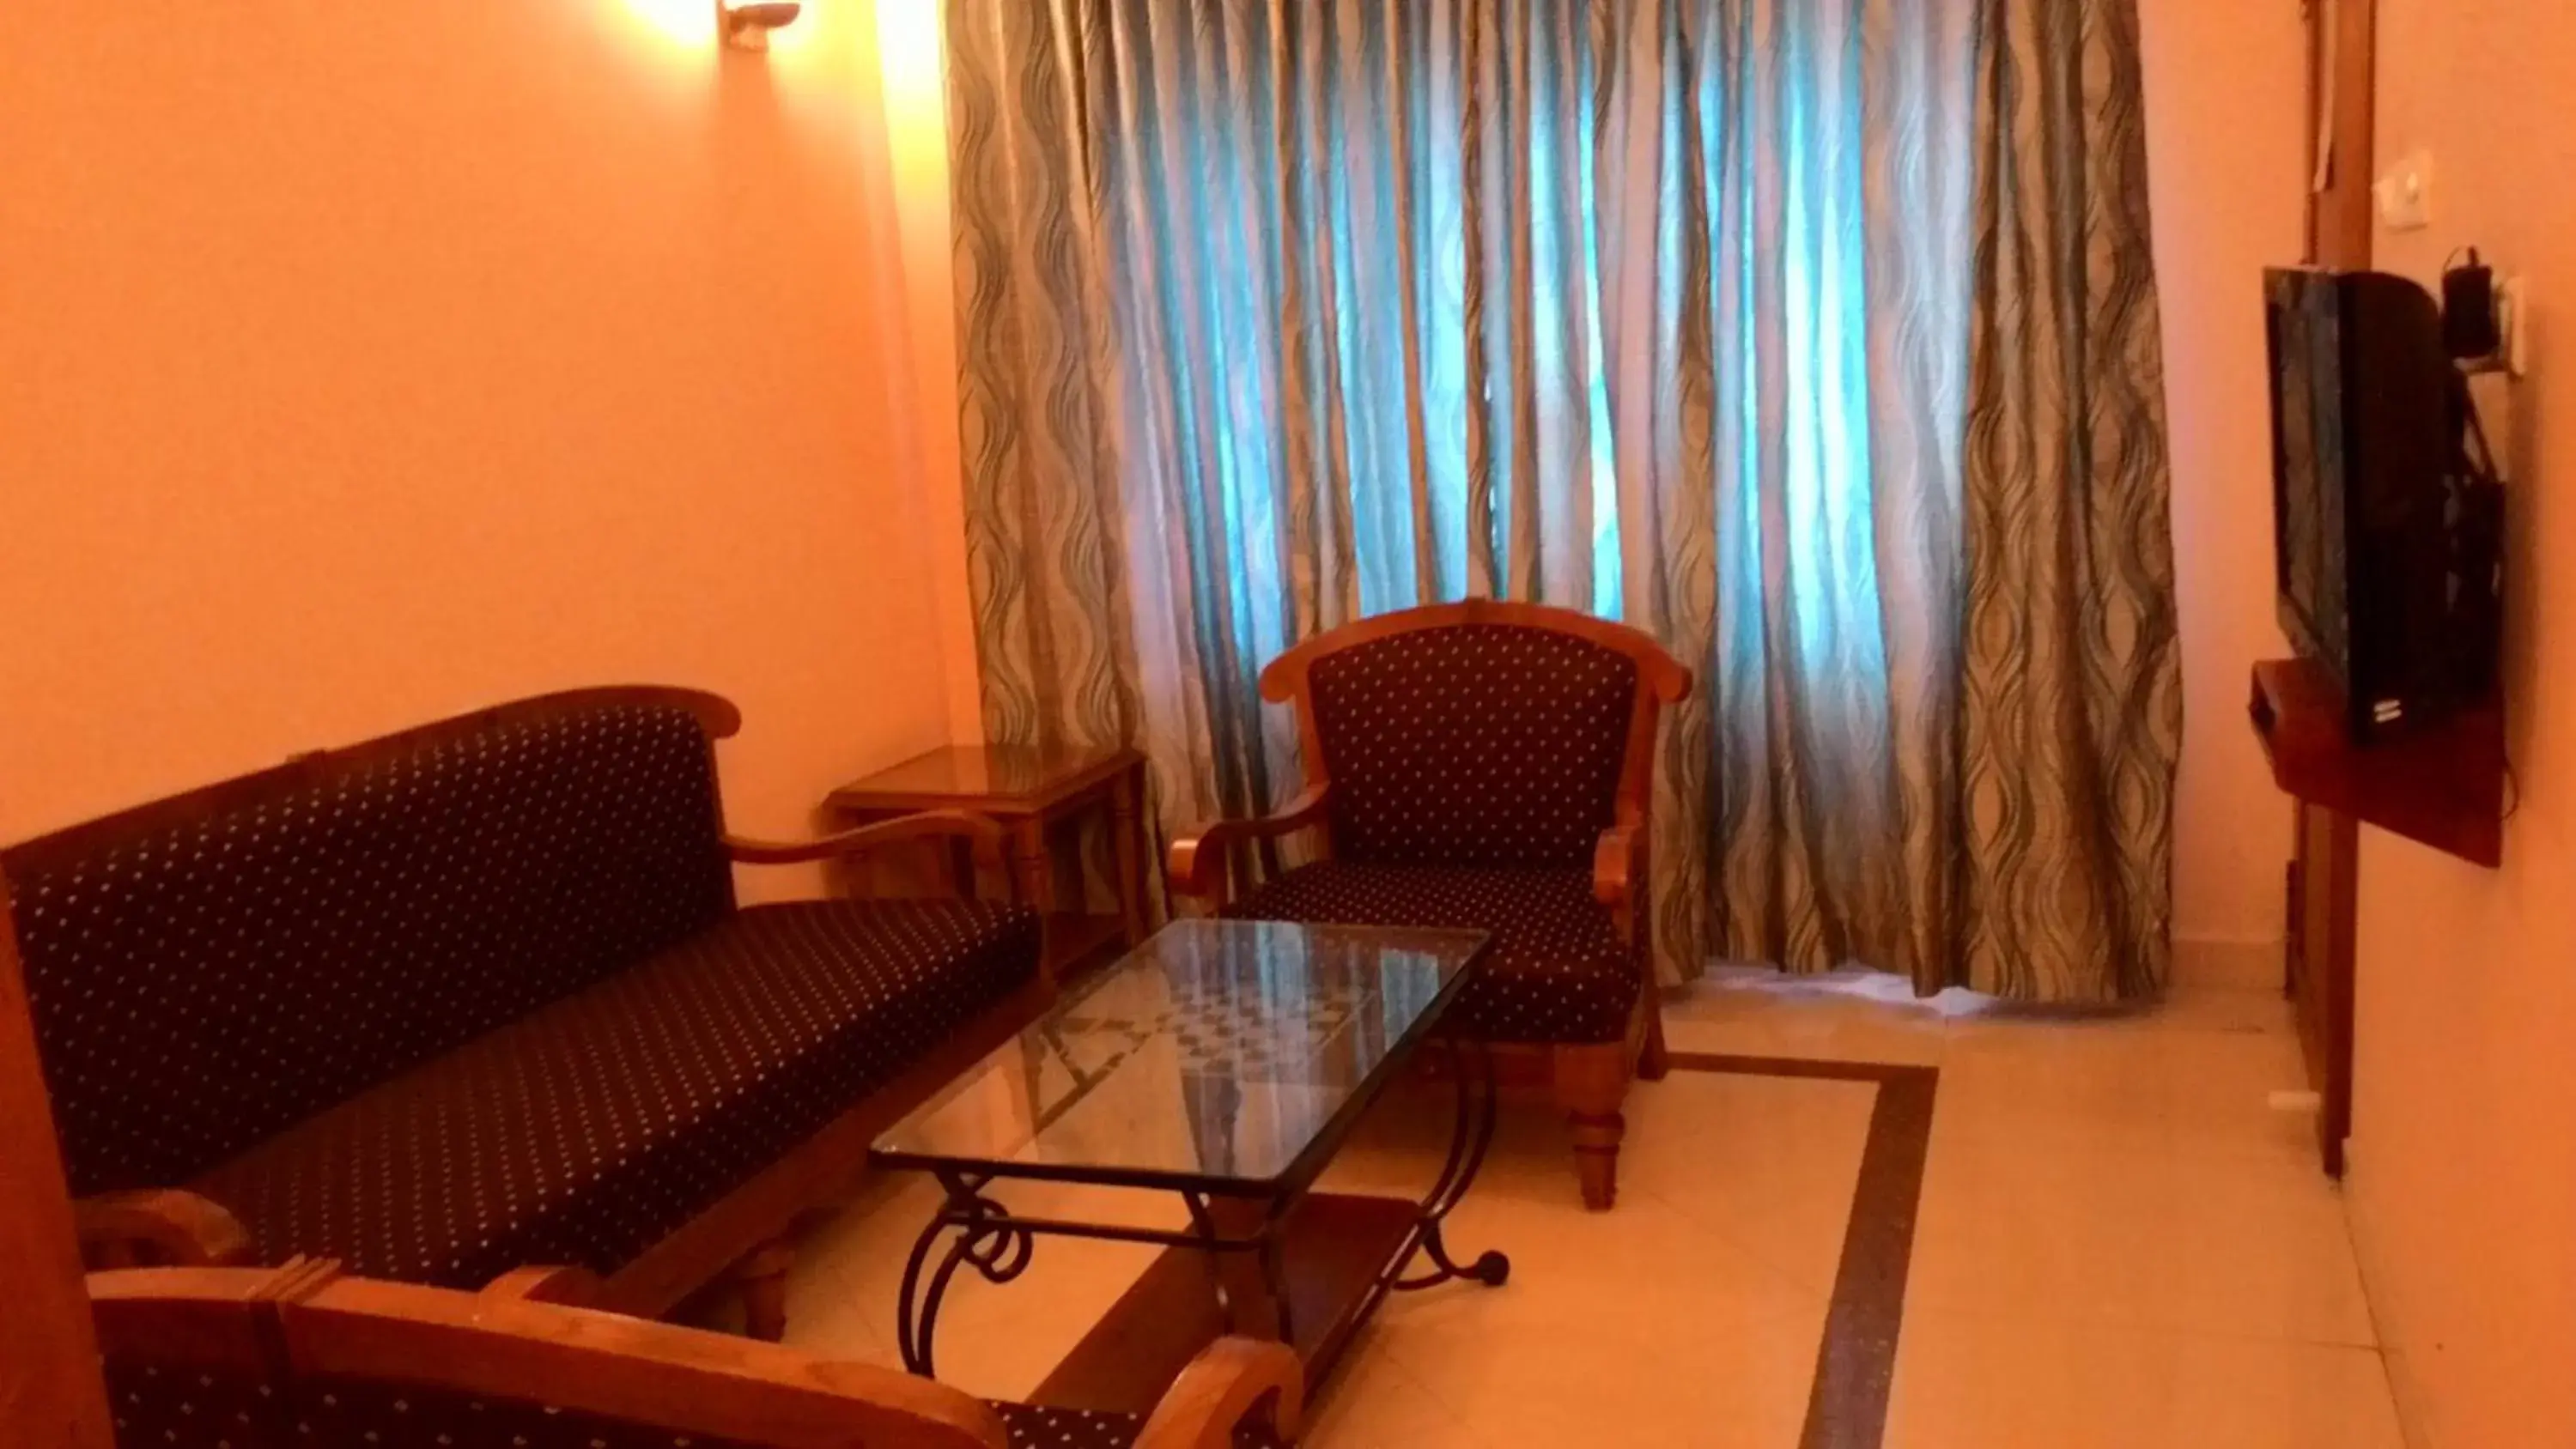 Seating Area in Ktdc Tea County Resort